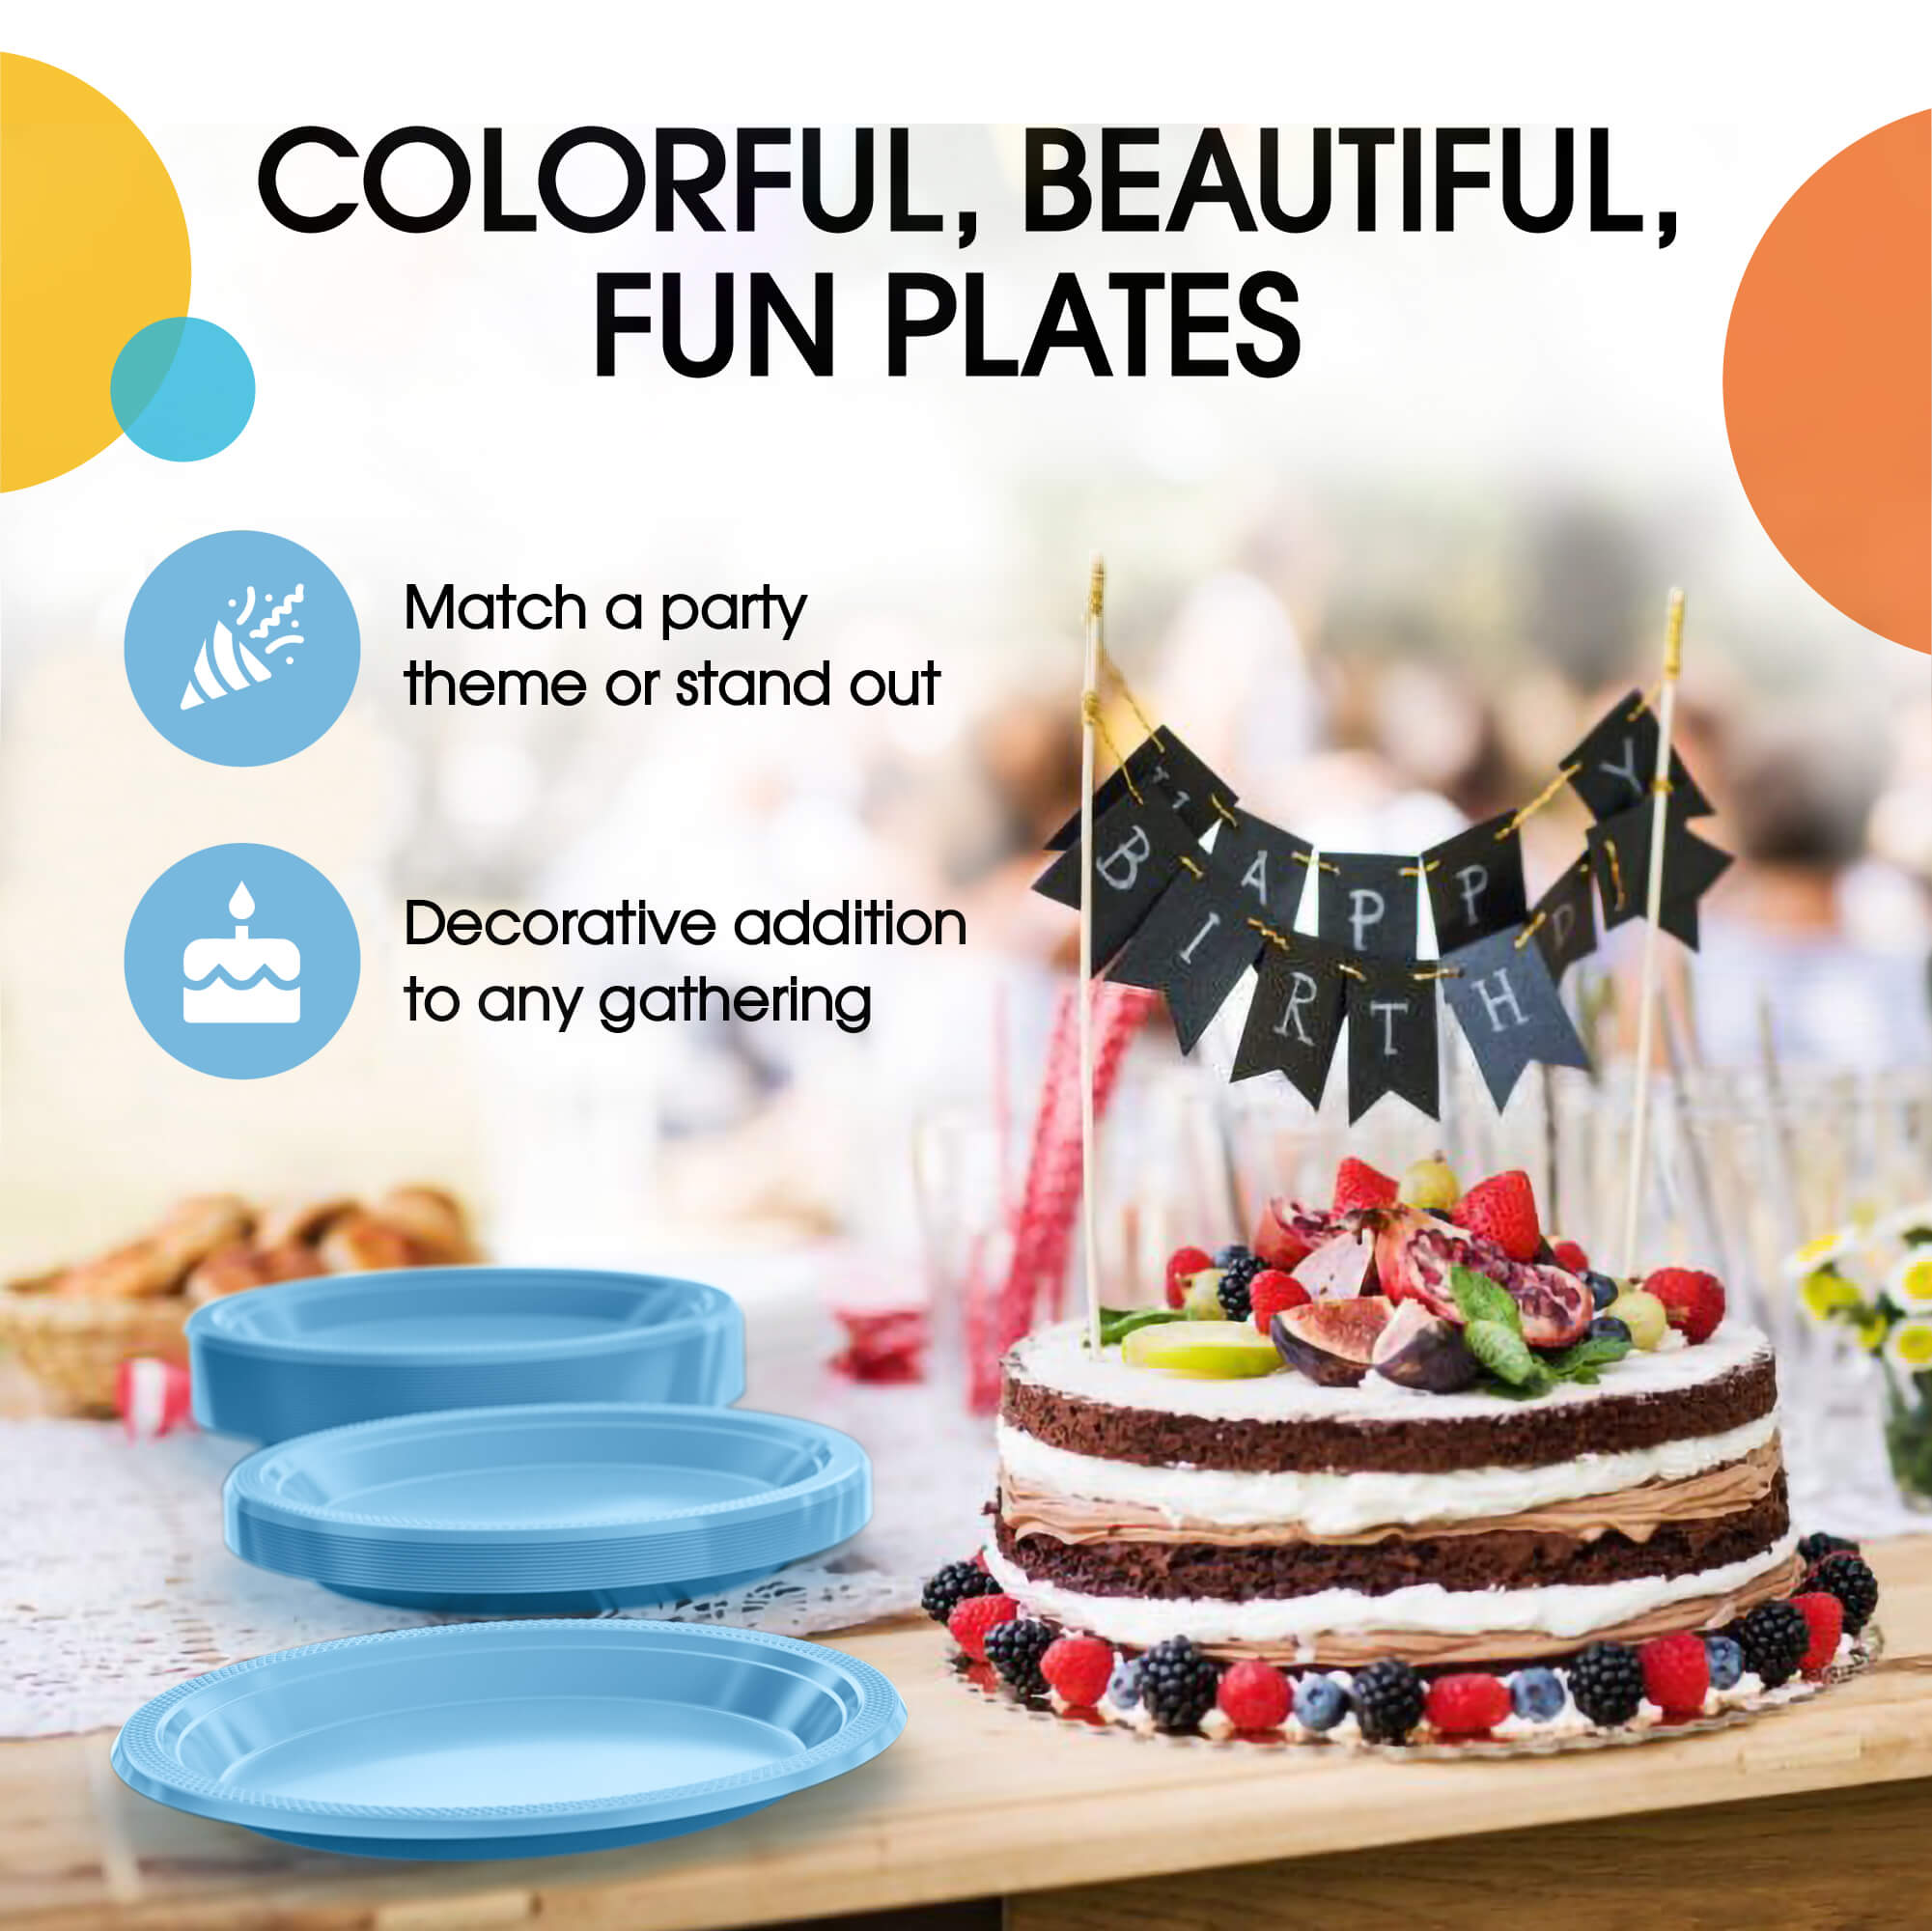 9 In. Light Blue Plastic Plates | 8 Count